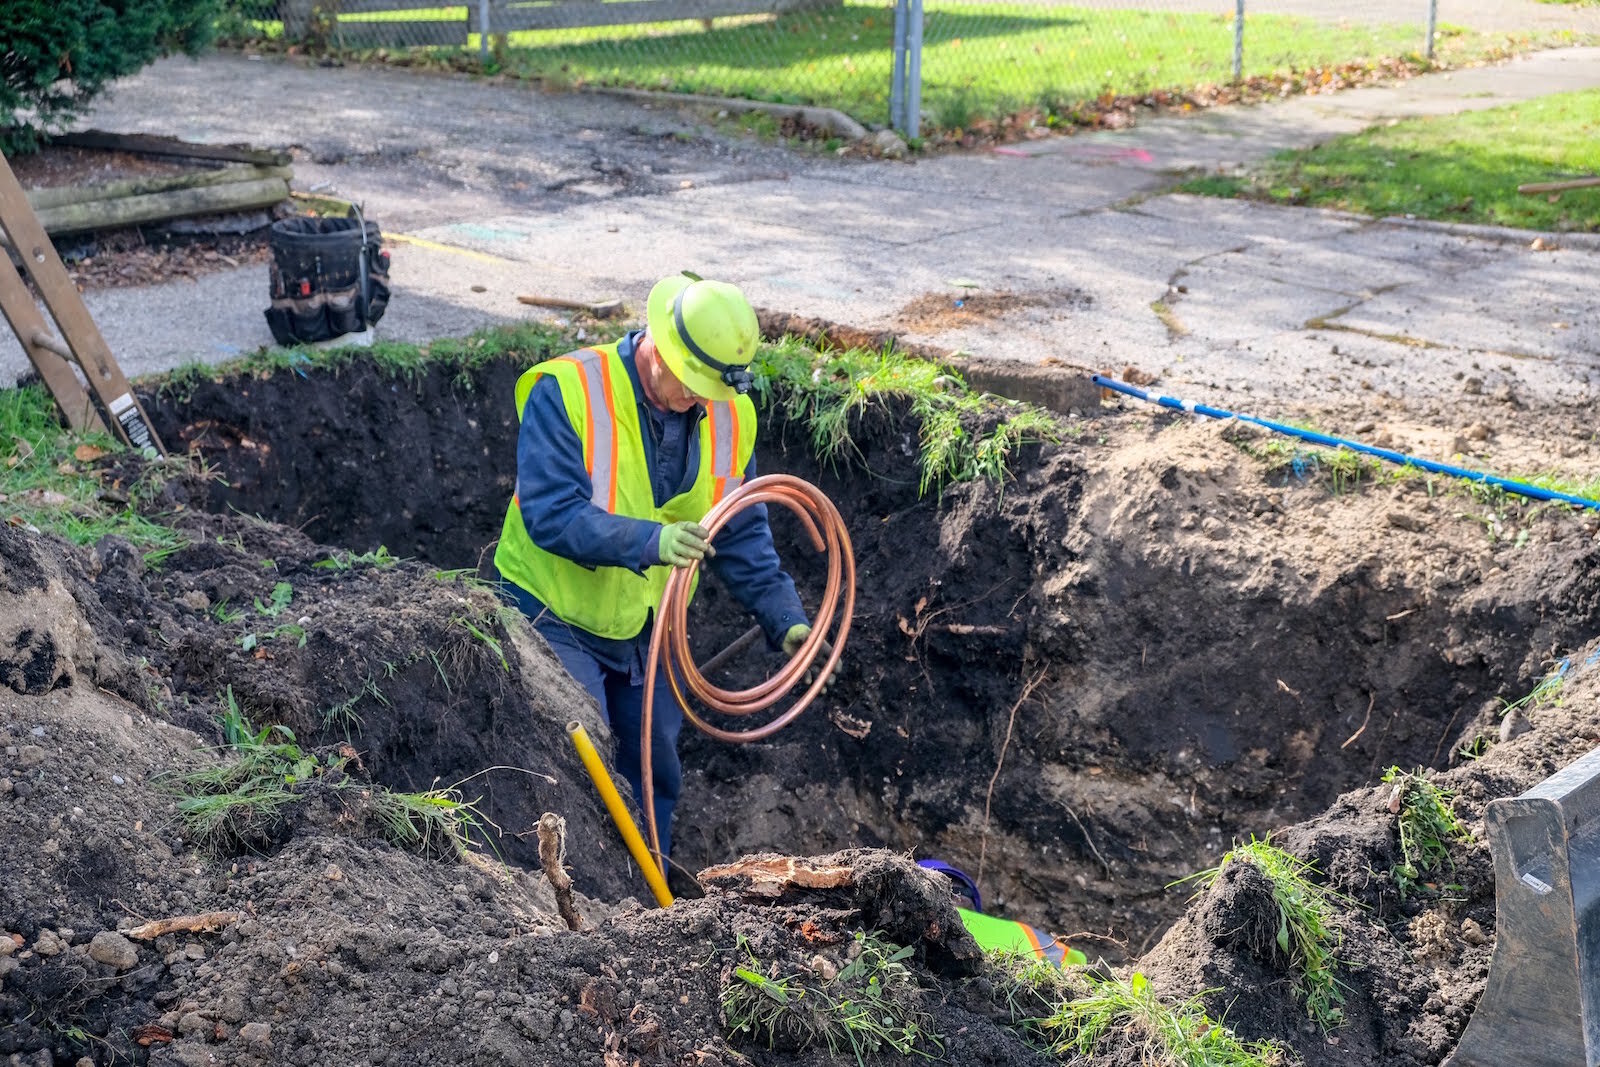 To replace lead water service lines, work crews will dig holes adjacent to houses to replace non-copper lines with copper.